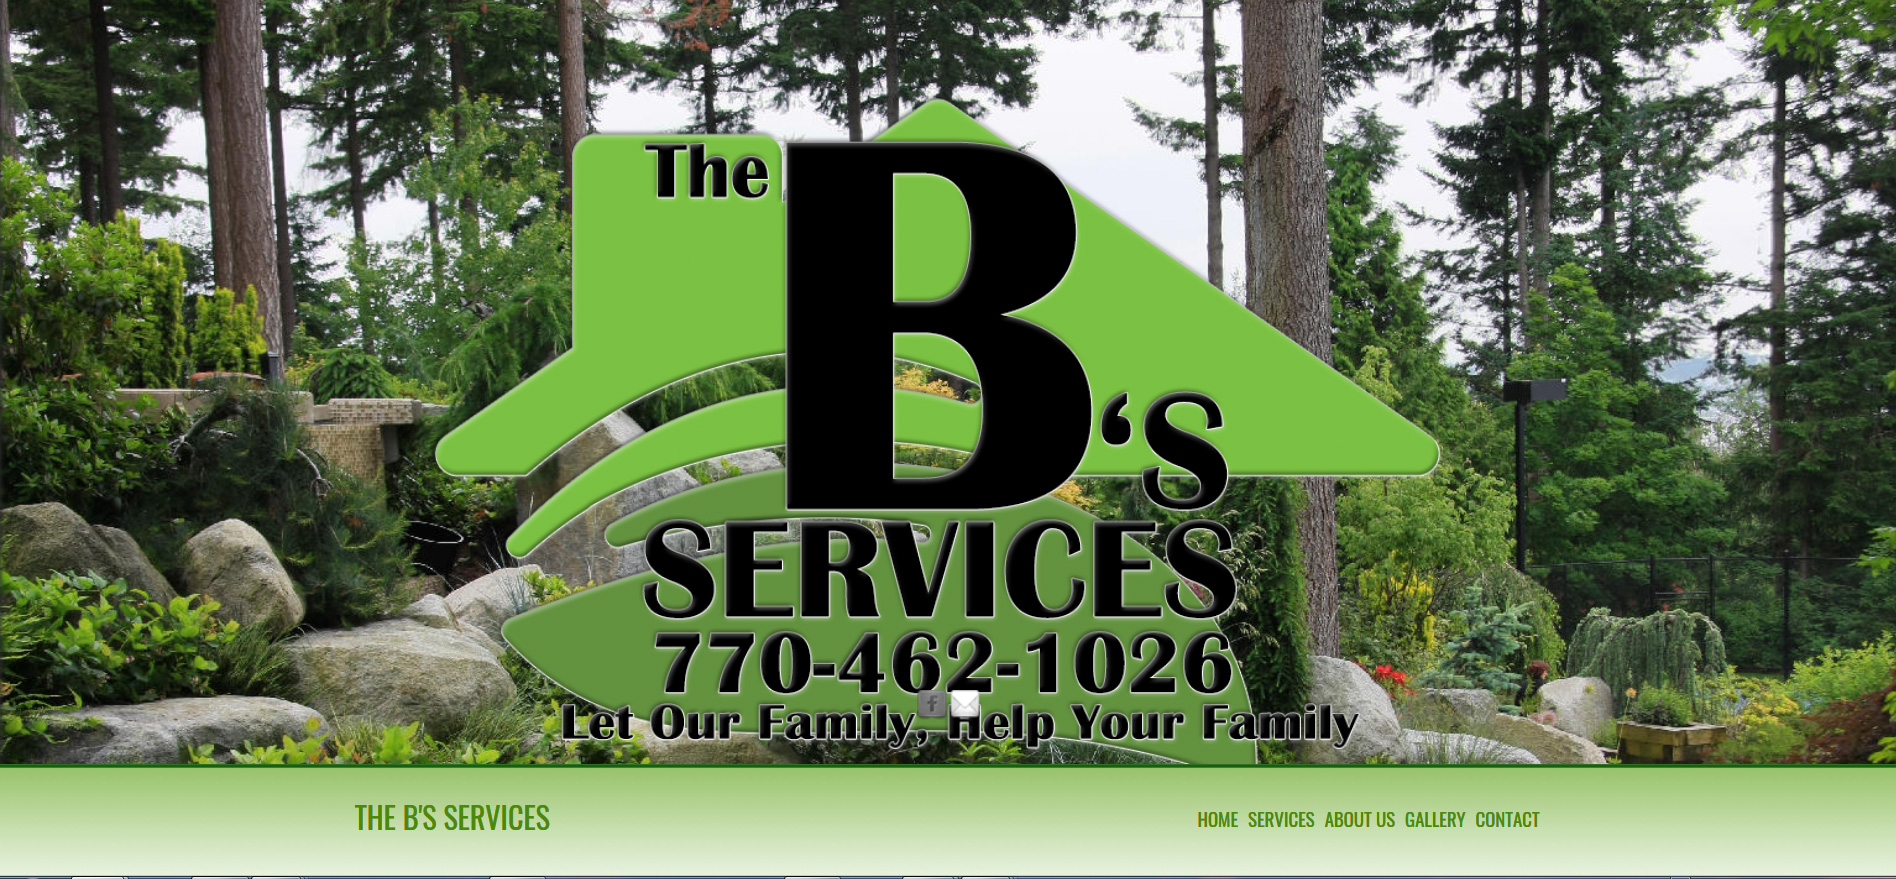 The B’s Services